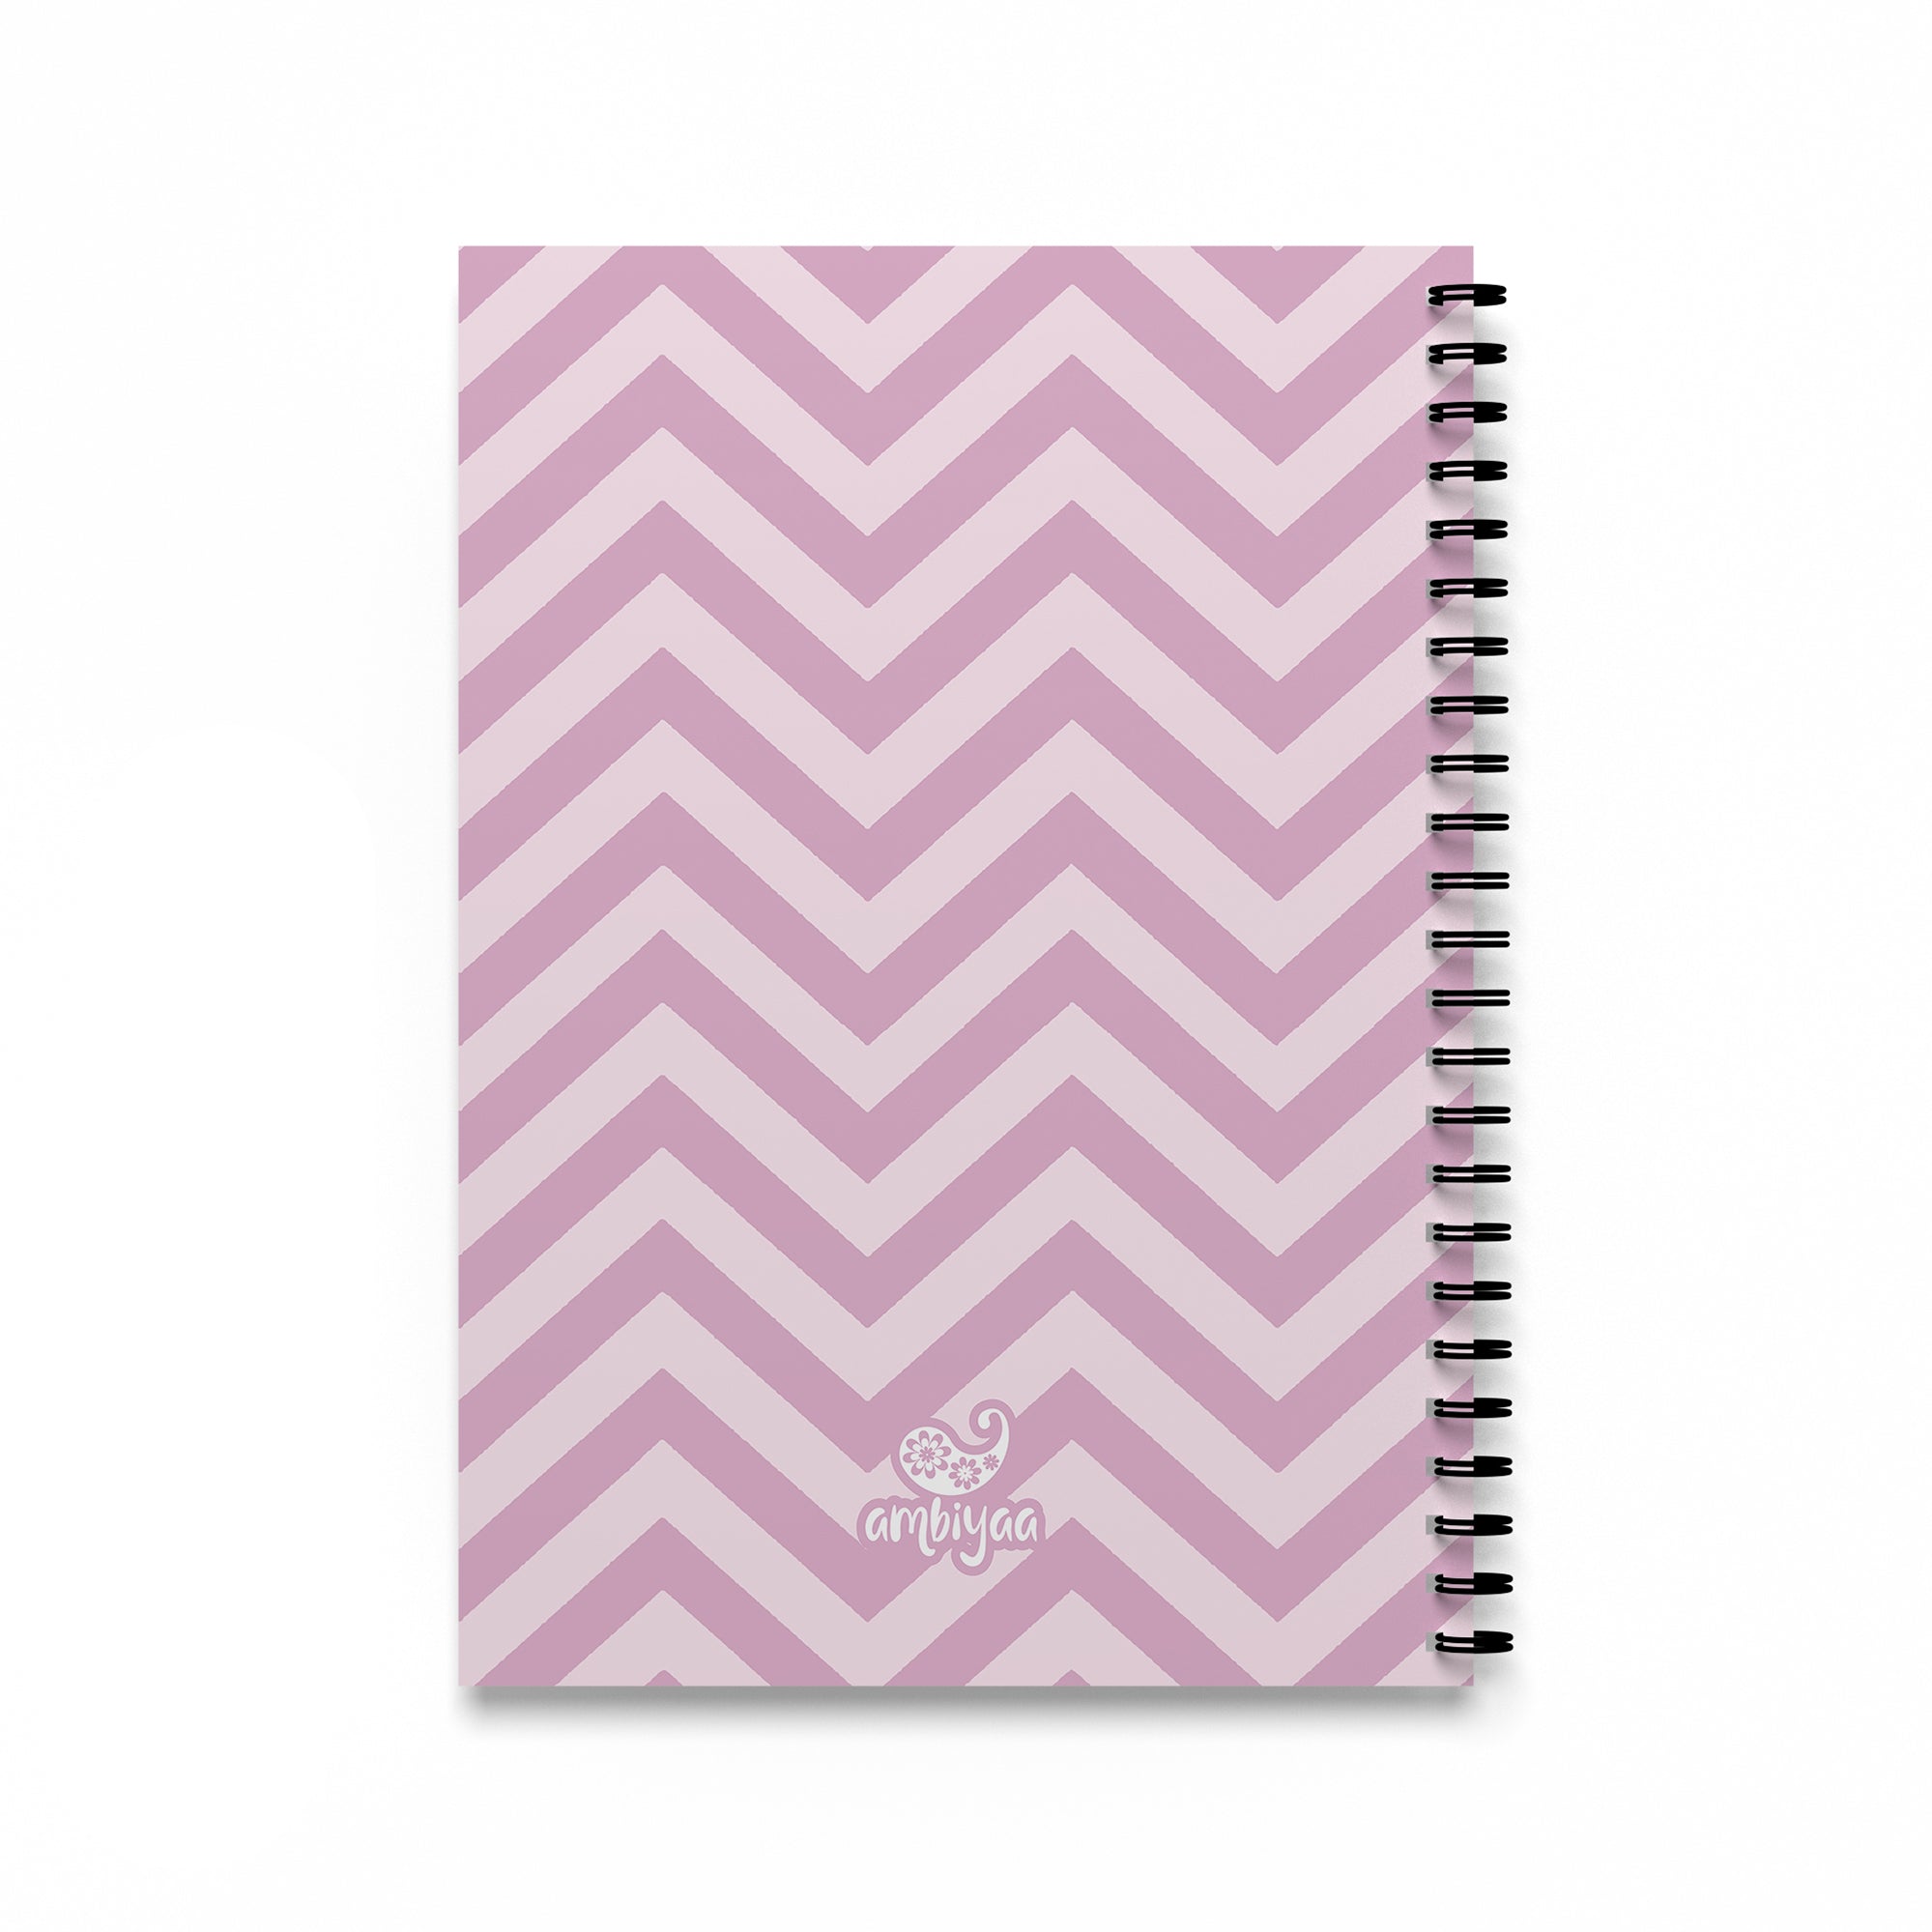 The Classy One Spiral Notebook